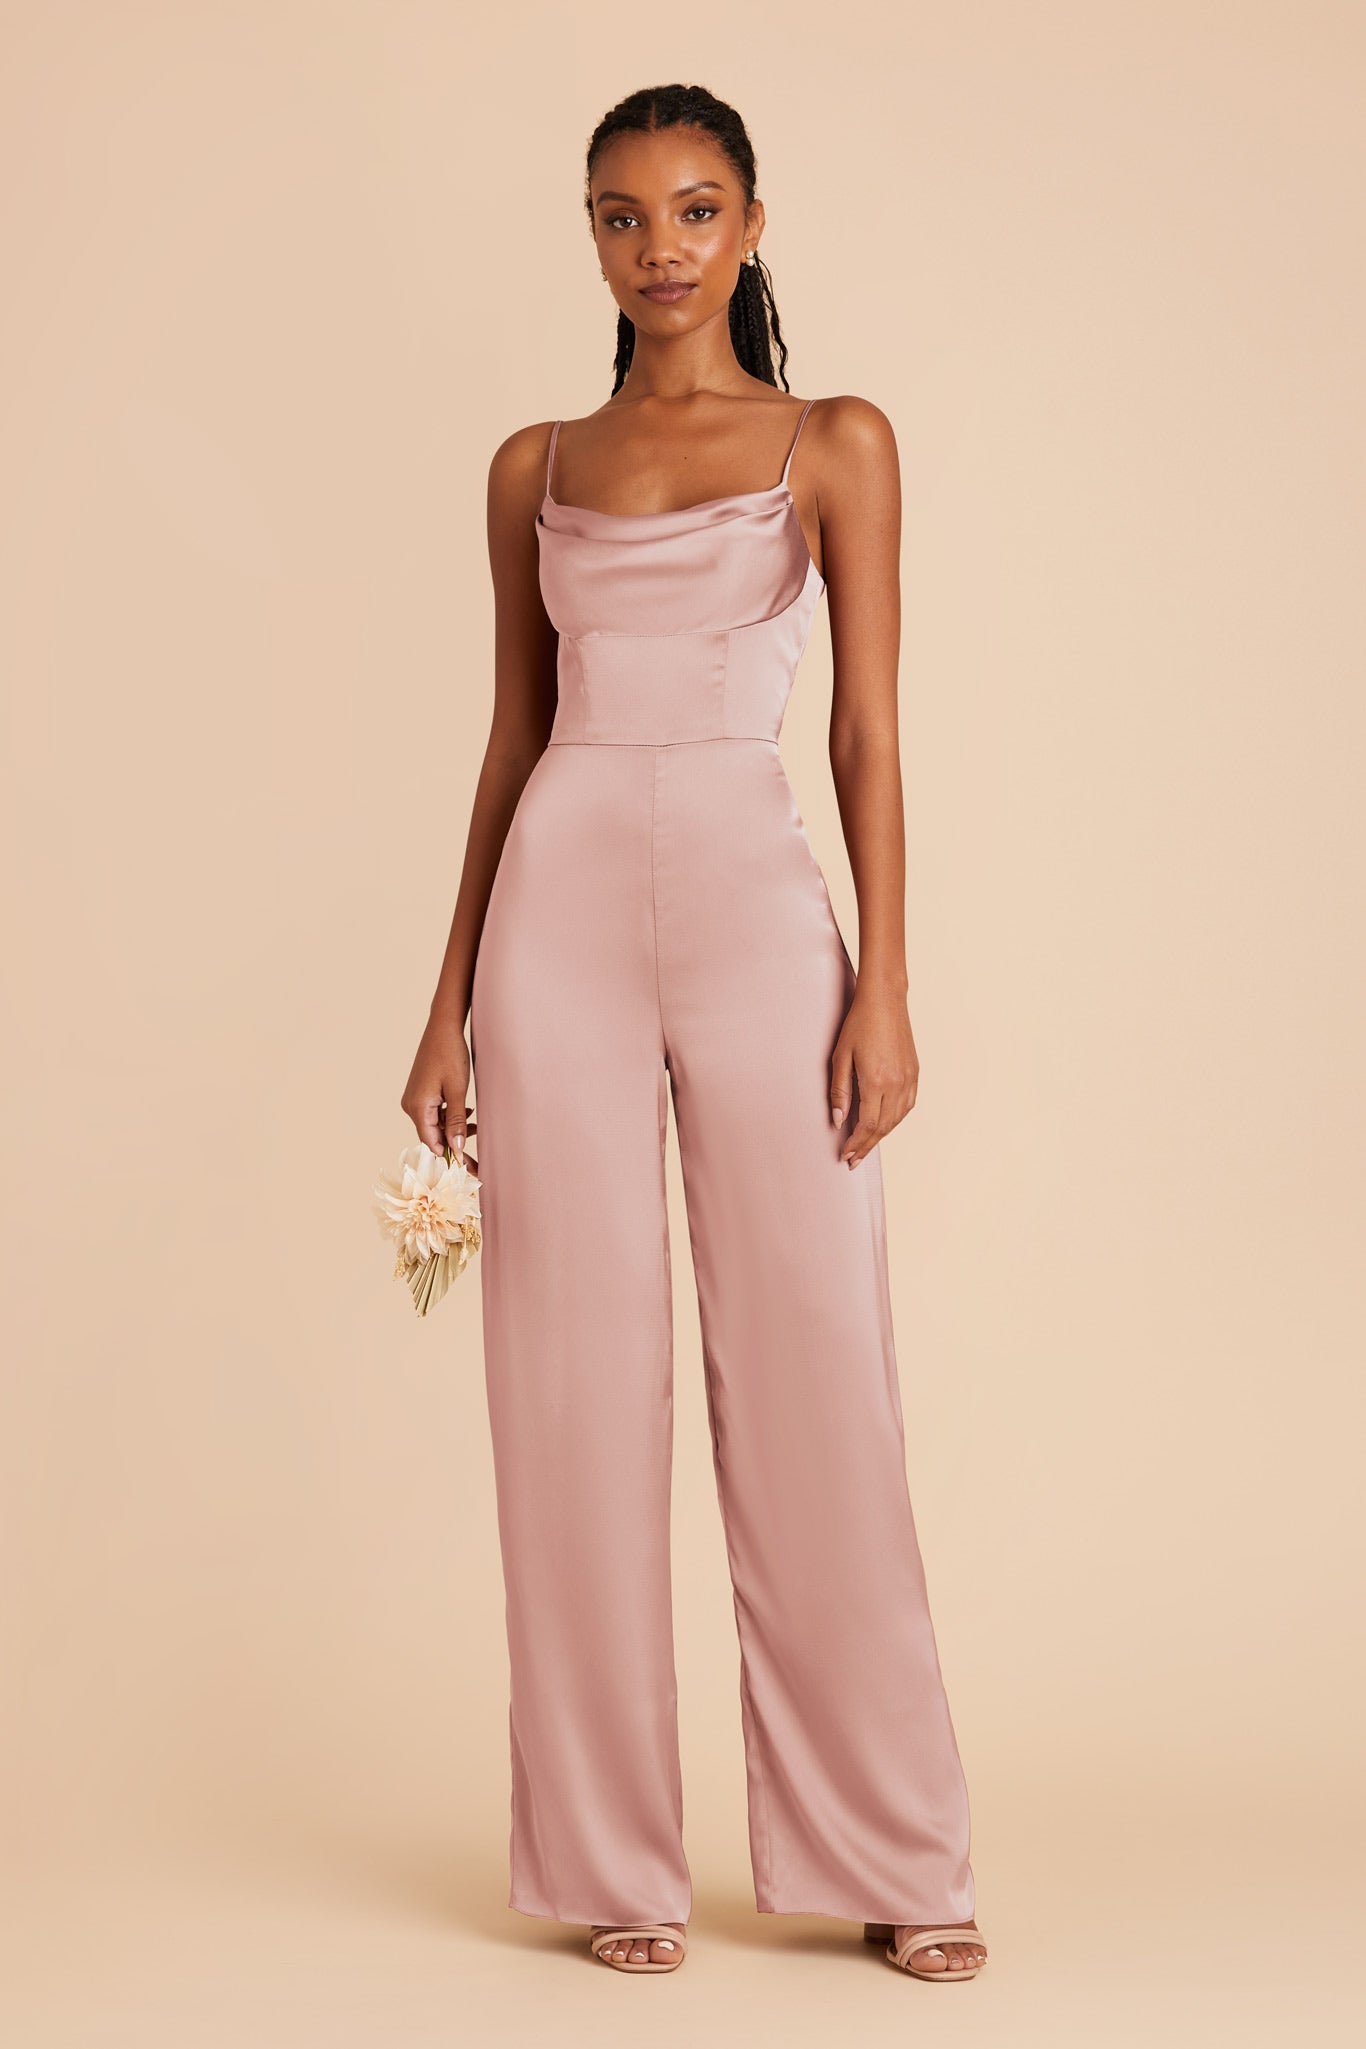 English Rose Donna Matte Satin Bridesmaid Jumpsuit by Birdy Grey